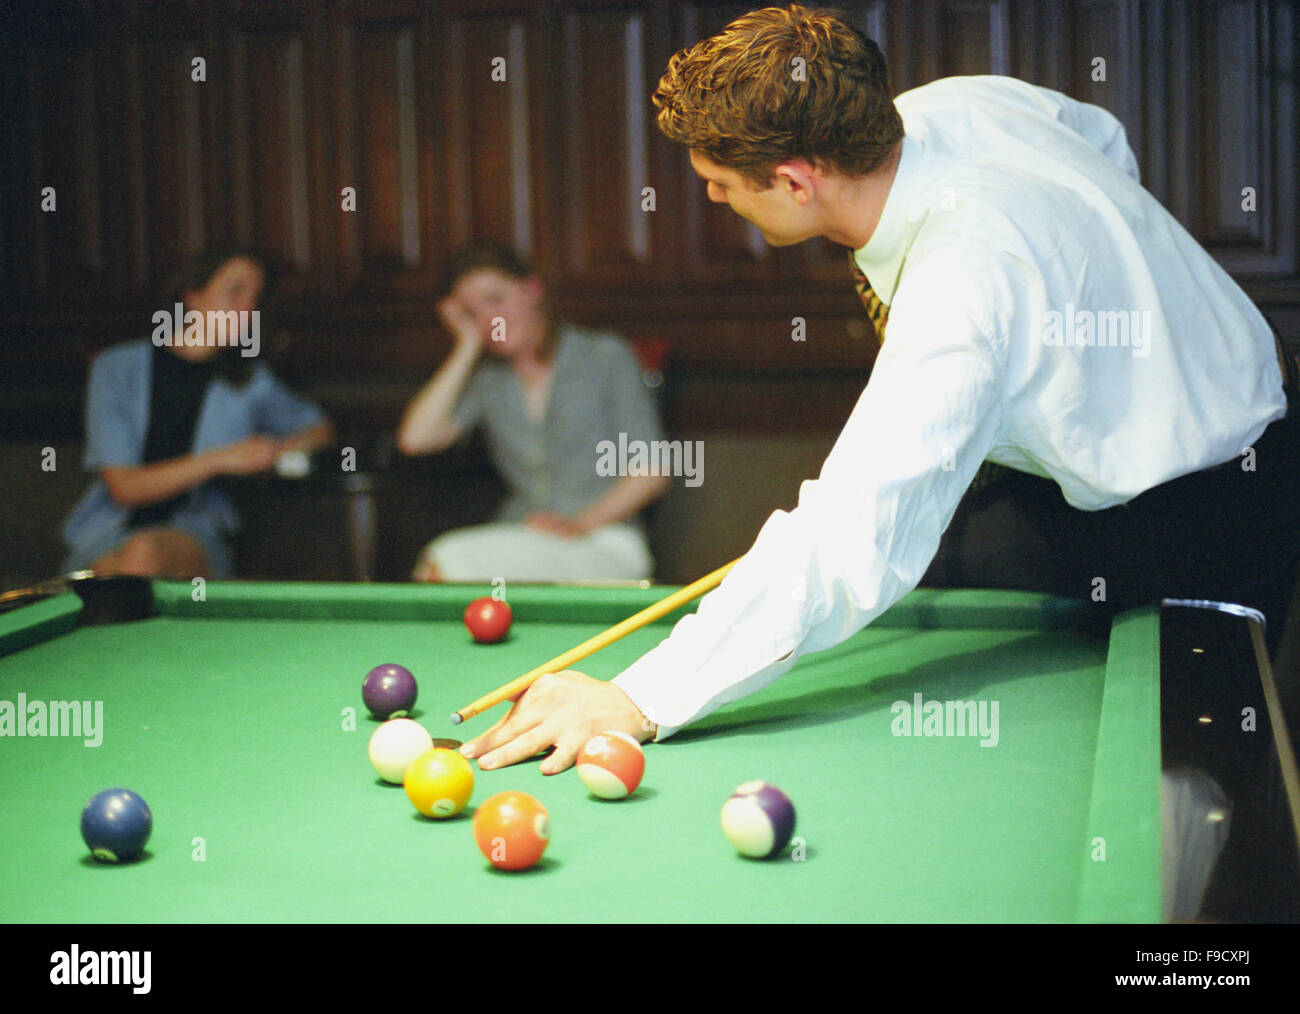 One Snooker Player And Two Viewers Stock Photo